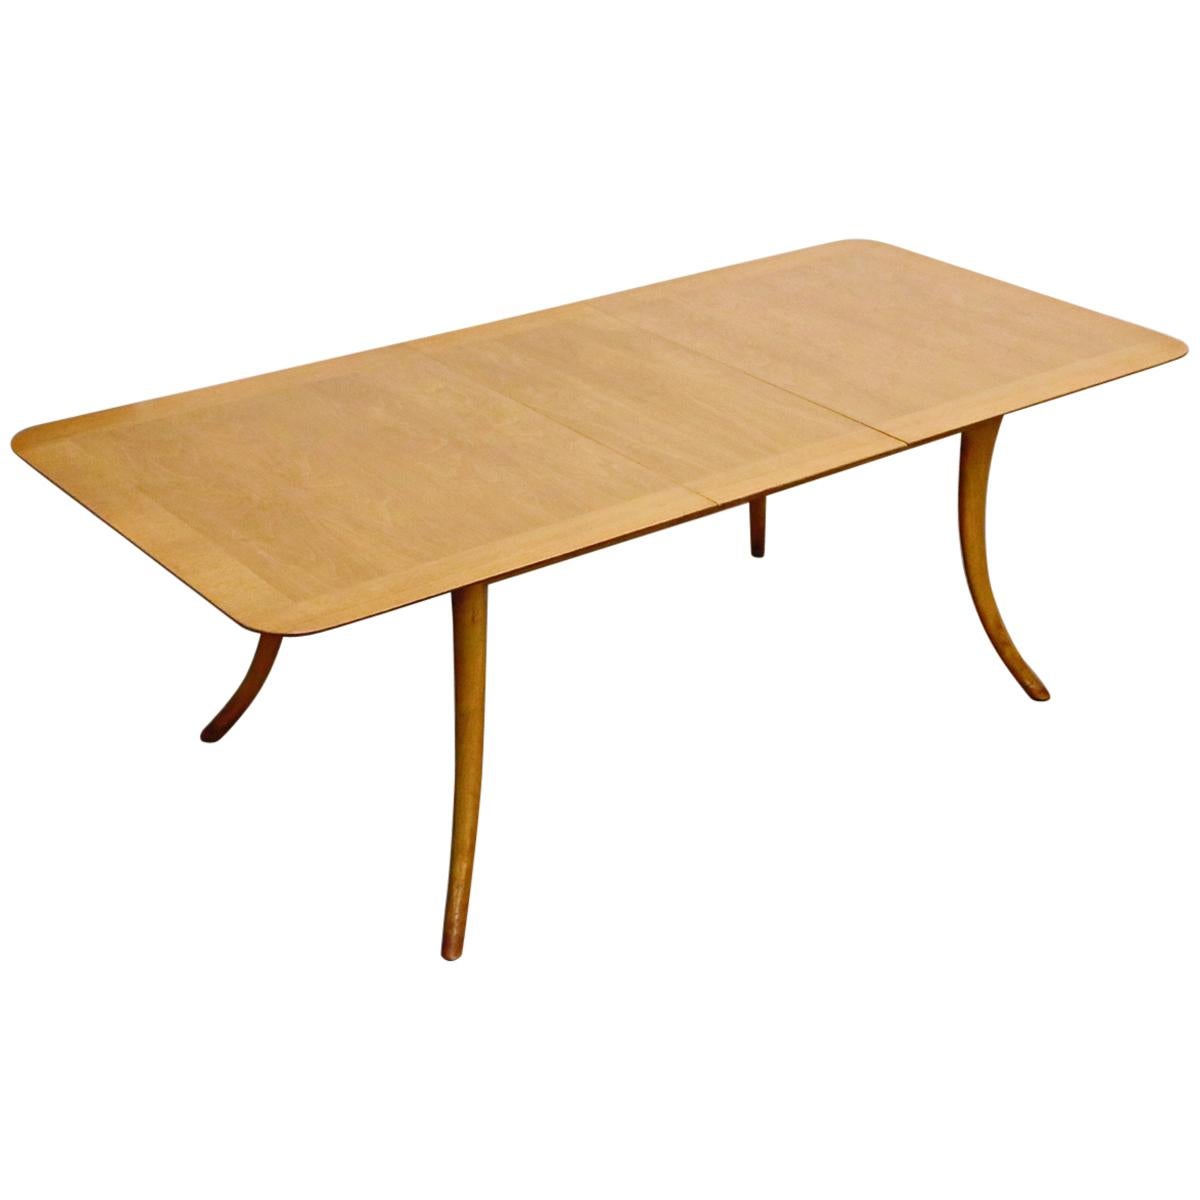 Expandable Dining Table by T.H. Robsjohn-Gibbings for Widdicomb, 1957, Signed